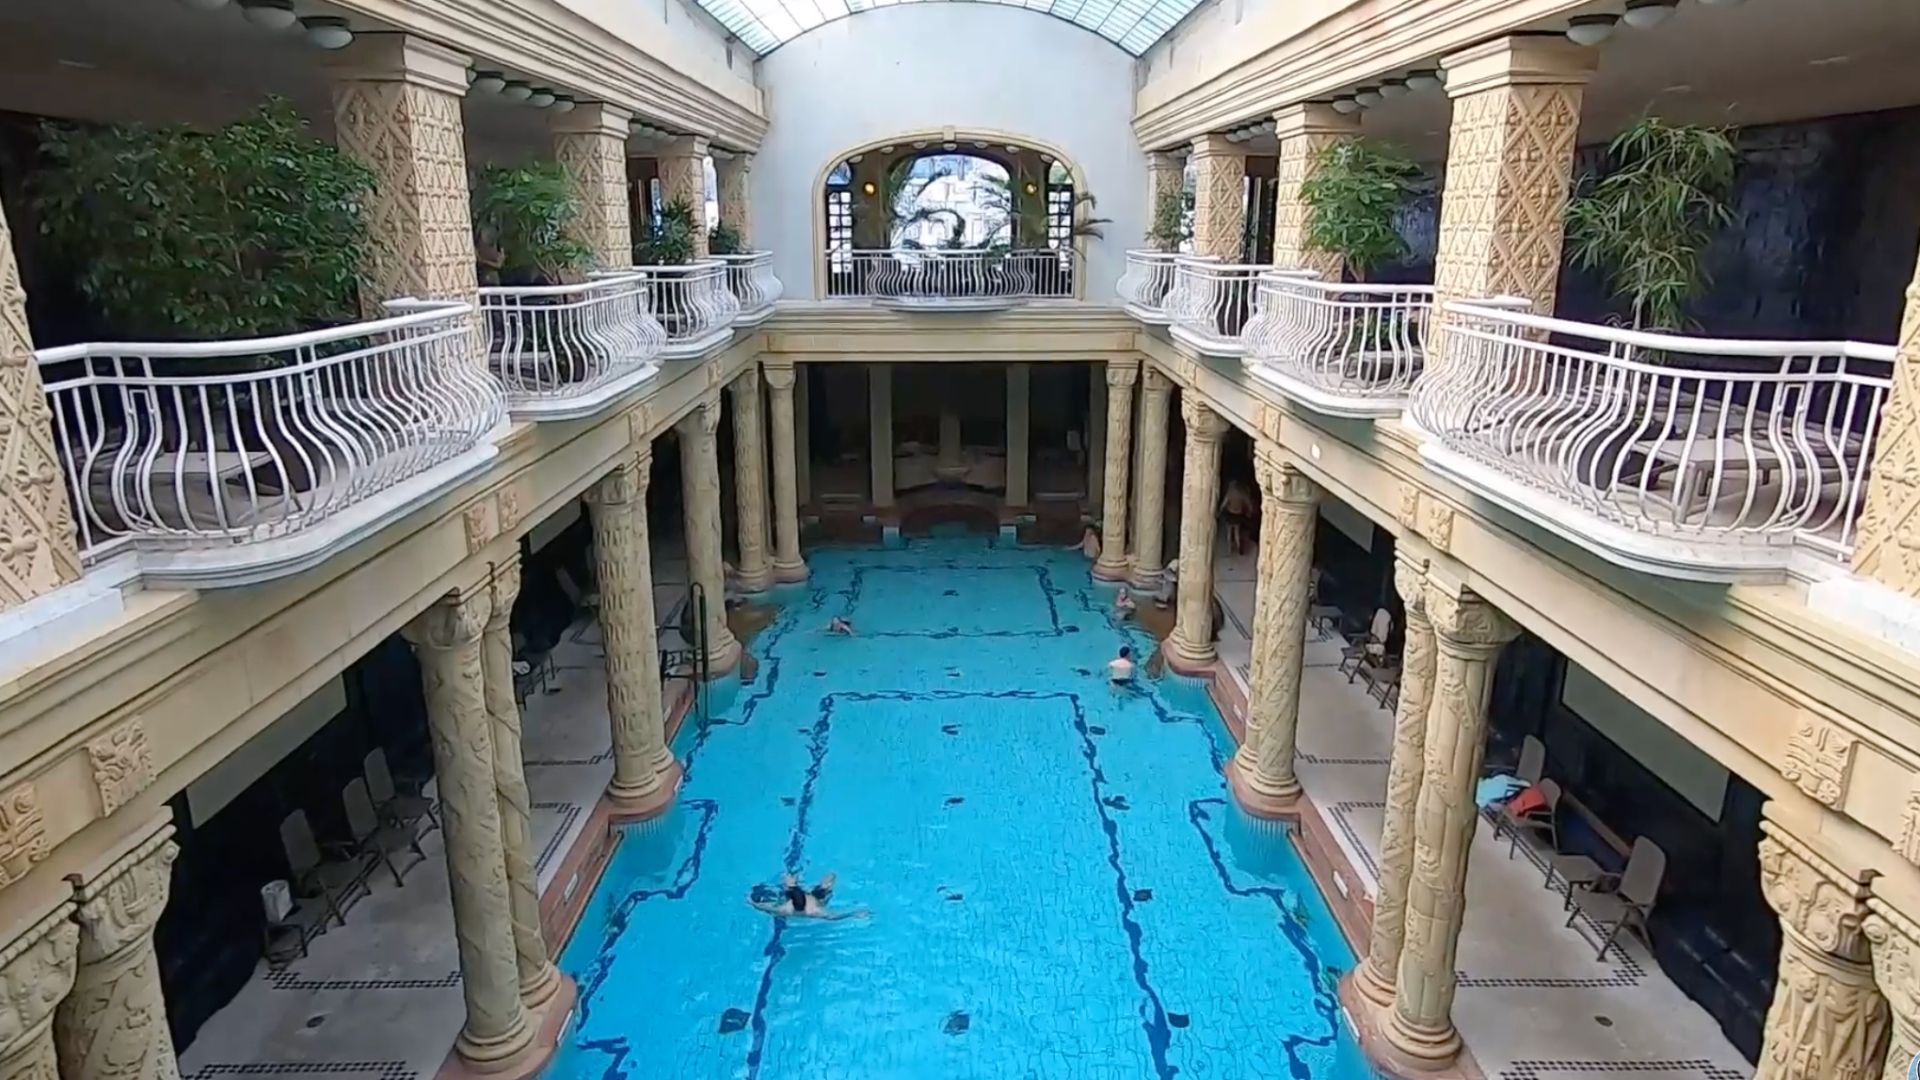 Indoor pool surrounded by intricate columns at Gellért Thermal Bath